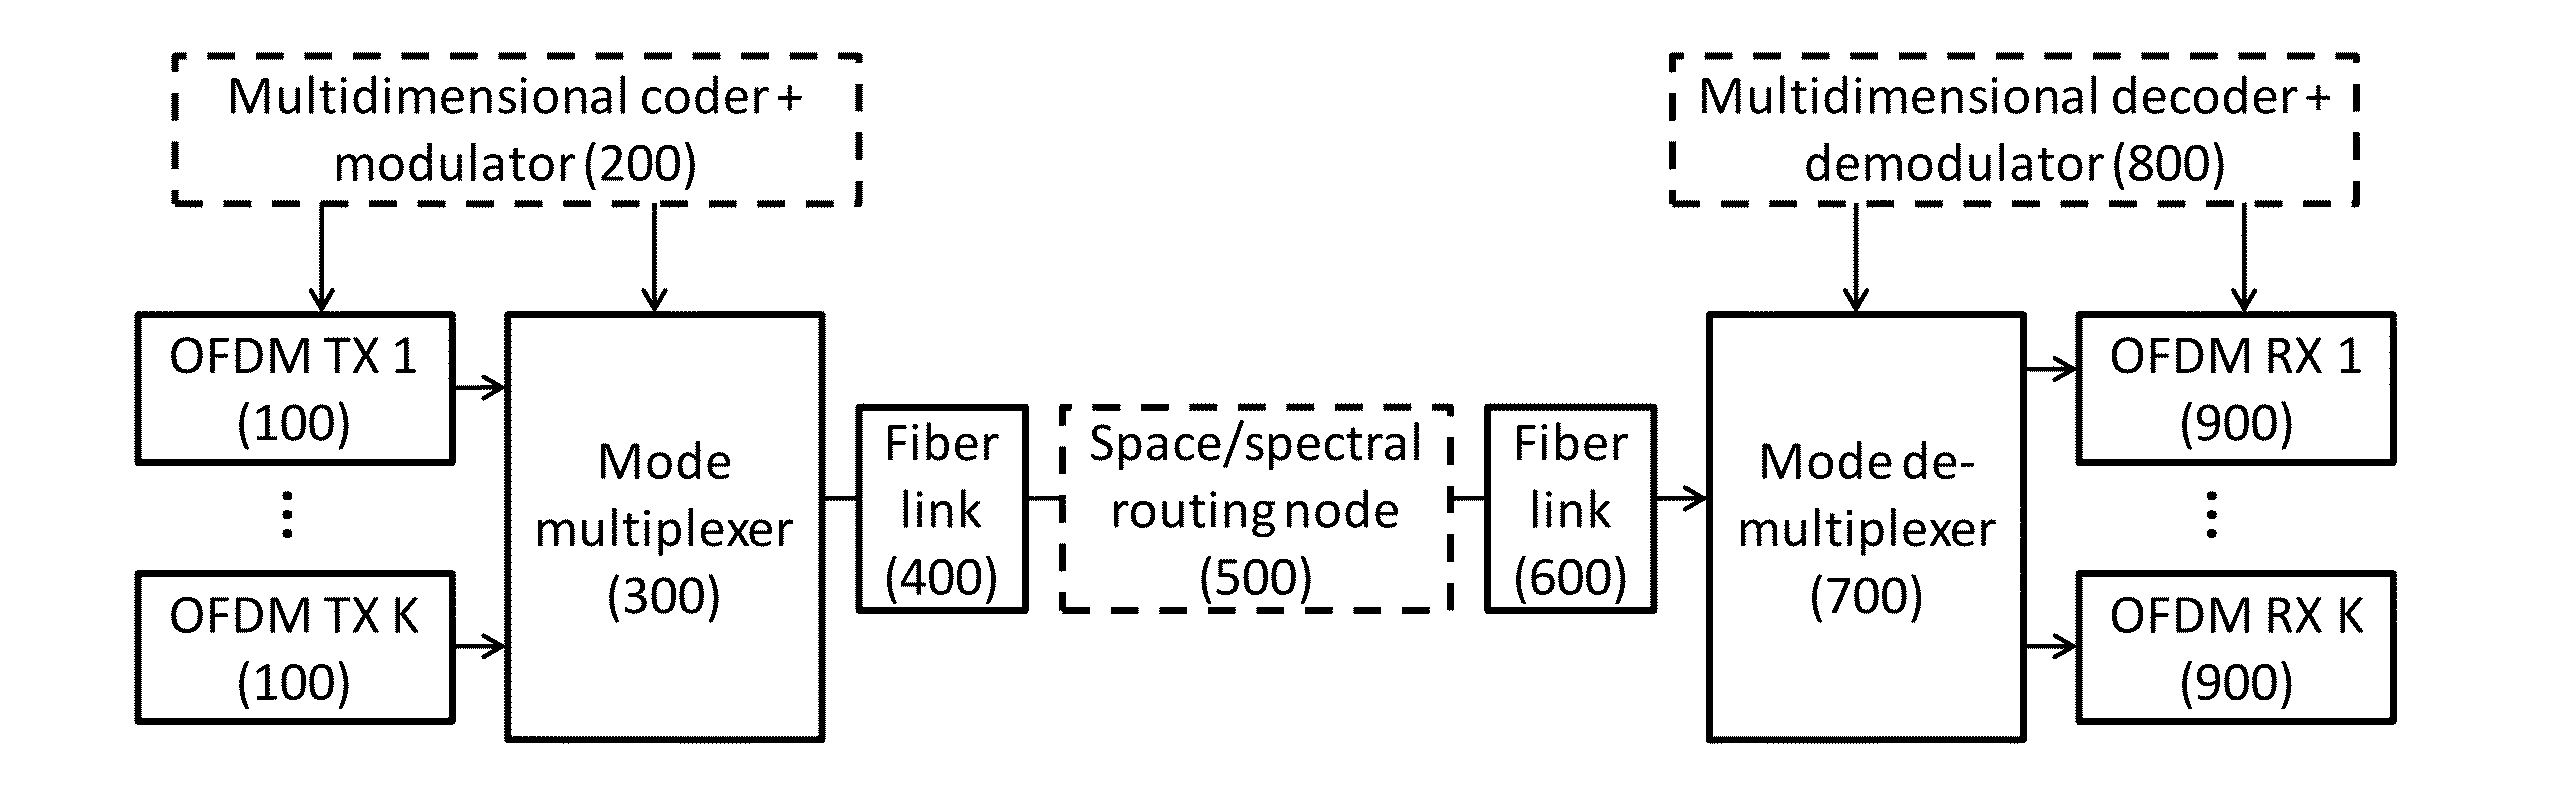 Dynamic Multidimensional Optical Networking Based on Spatial and Spectral Processing